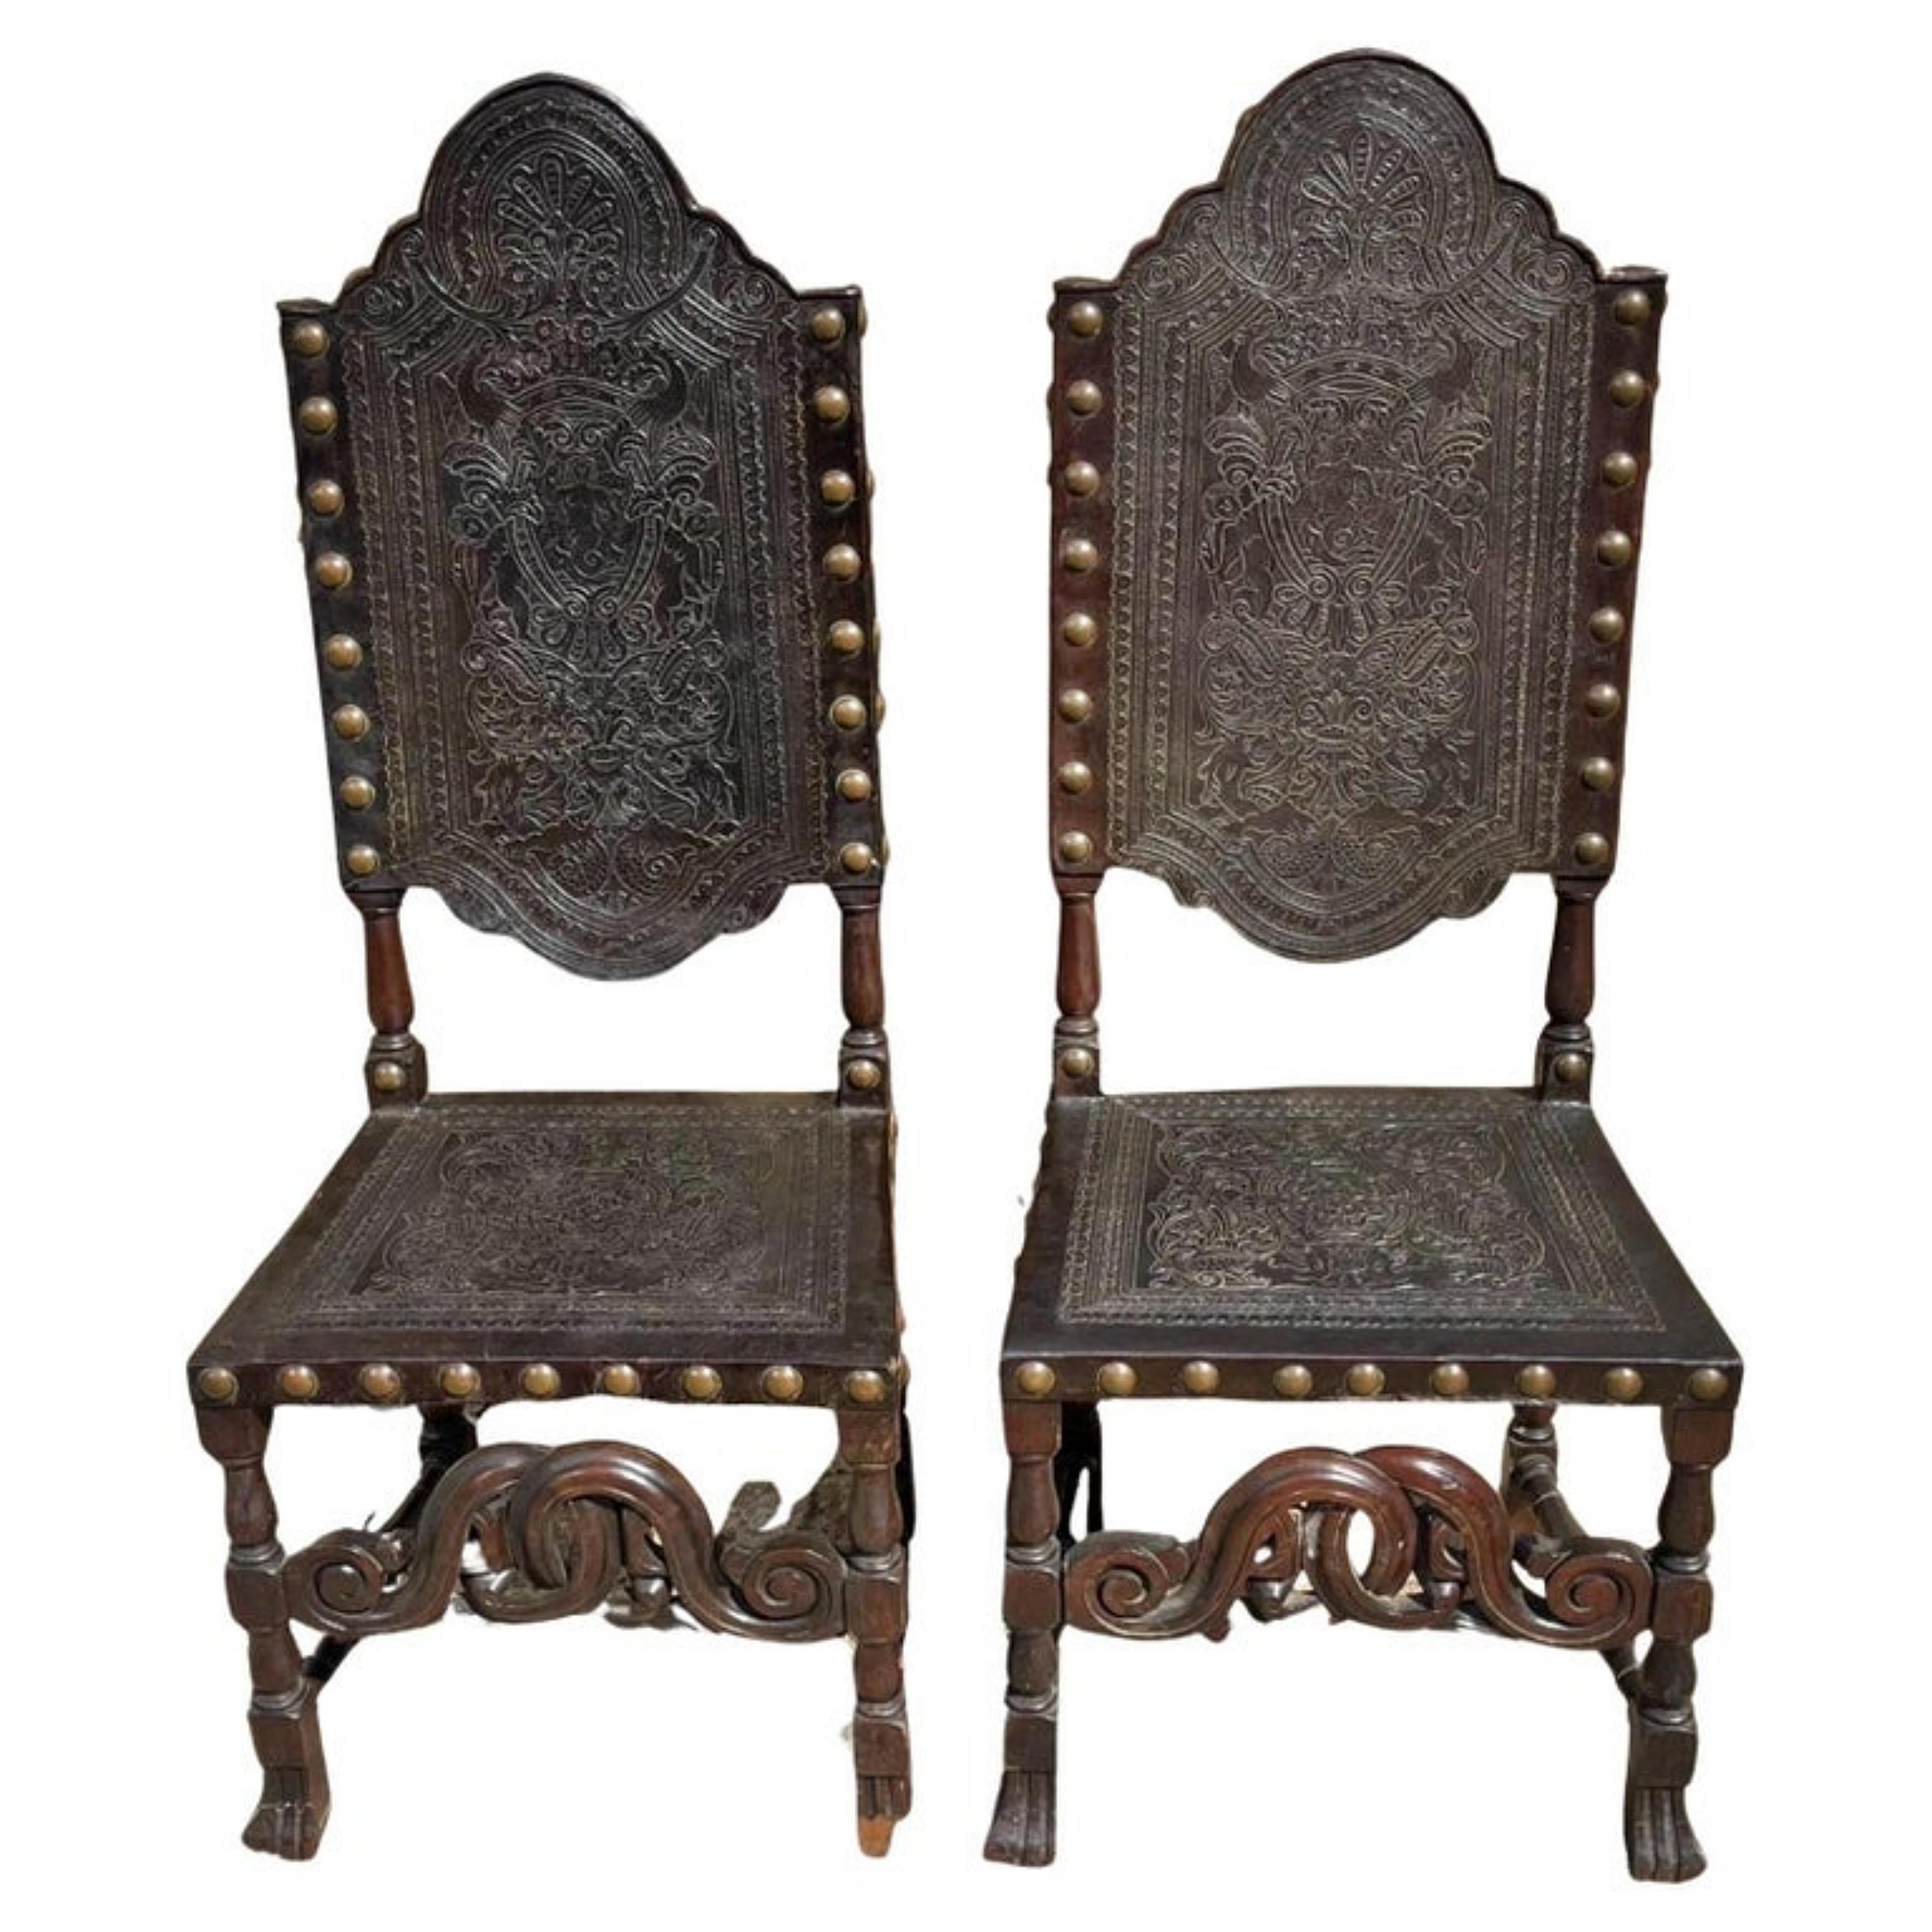 Portuguese Pair of High-Backed Chairs, 18th Century For Sale 1